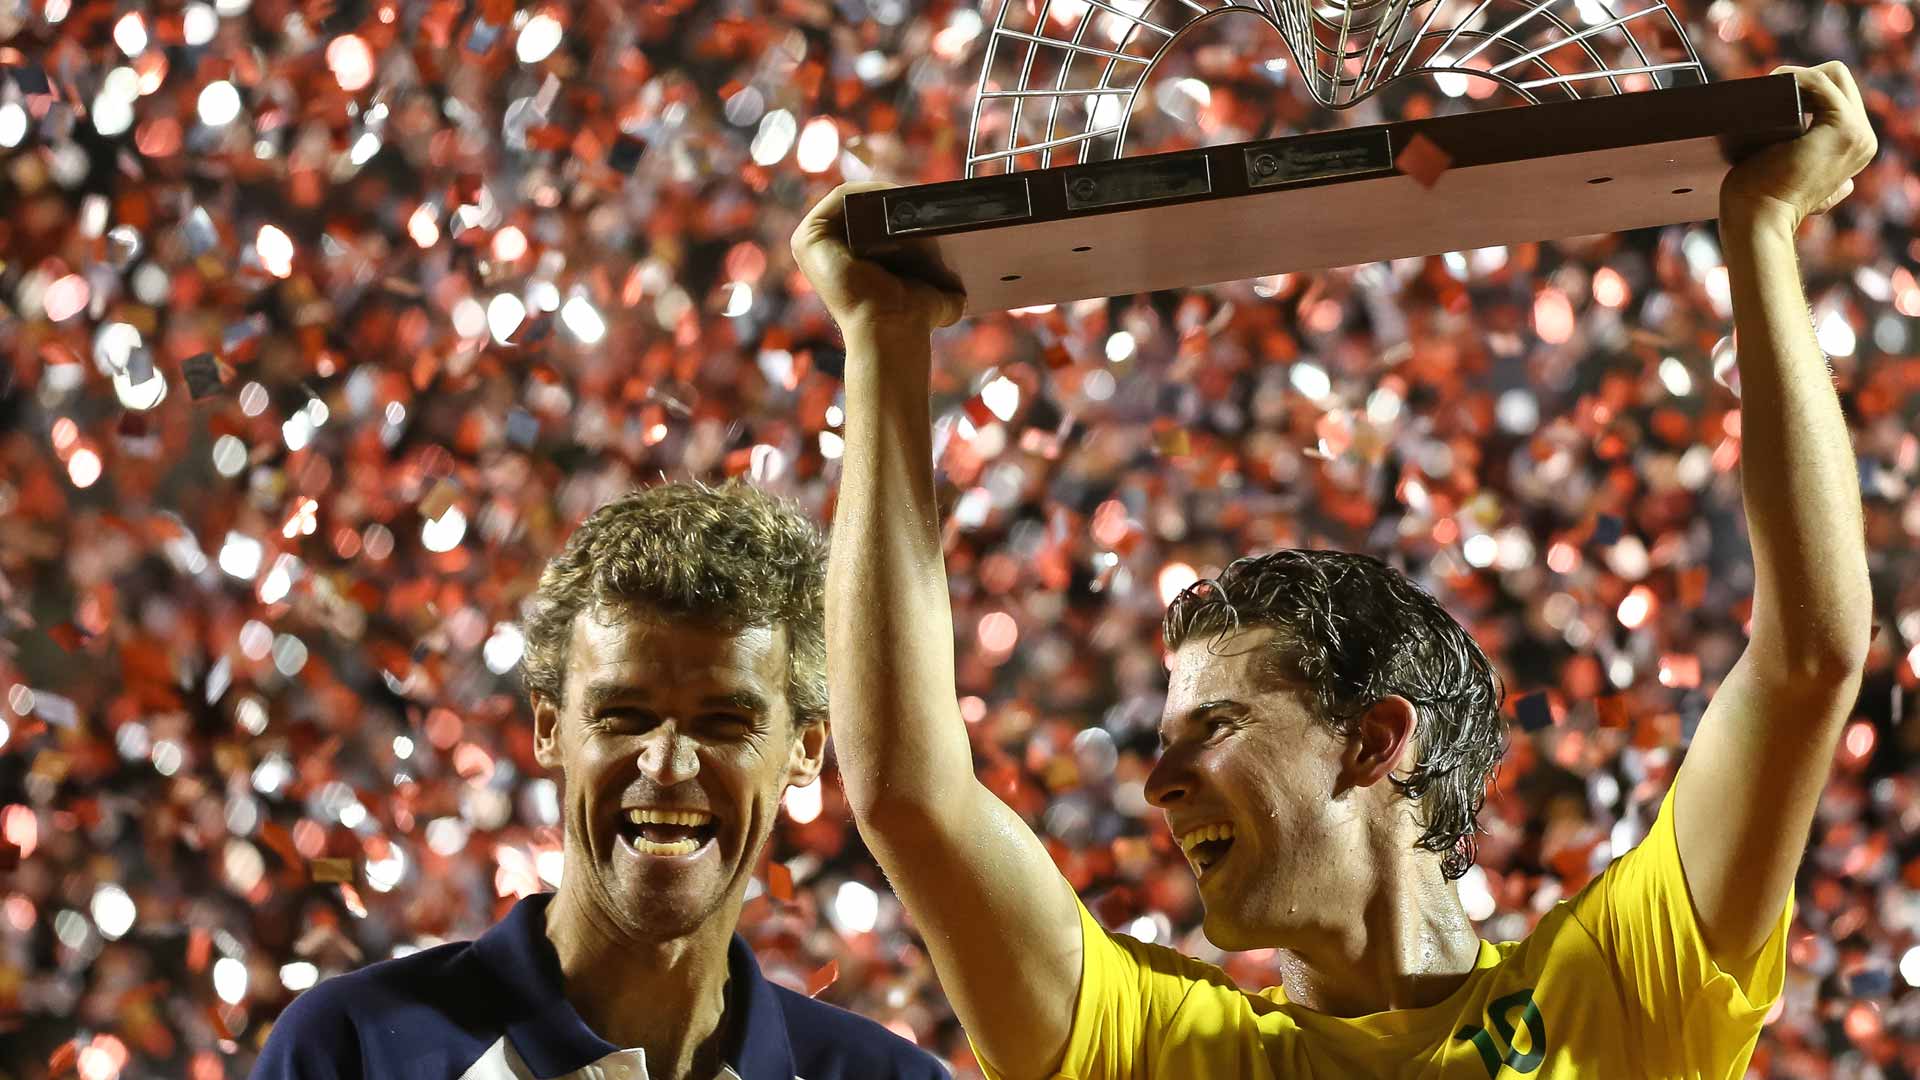 Former World No. 1 <a href='https://www.atptour.com/en/players/gustavo-kuerten/k293/overview'>Gustavo Kuerten</a> and <a href='https://www.atptour.com/en/players/dominic-thiem/tb69/overview'>Dominic Thiem</a> share a laugh at the 2017 Rio Open trophy ceremony.